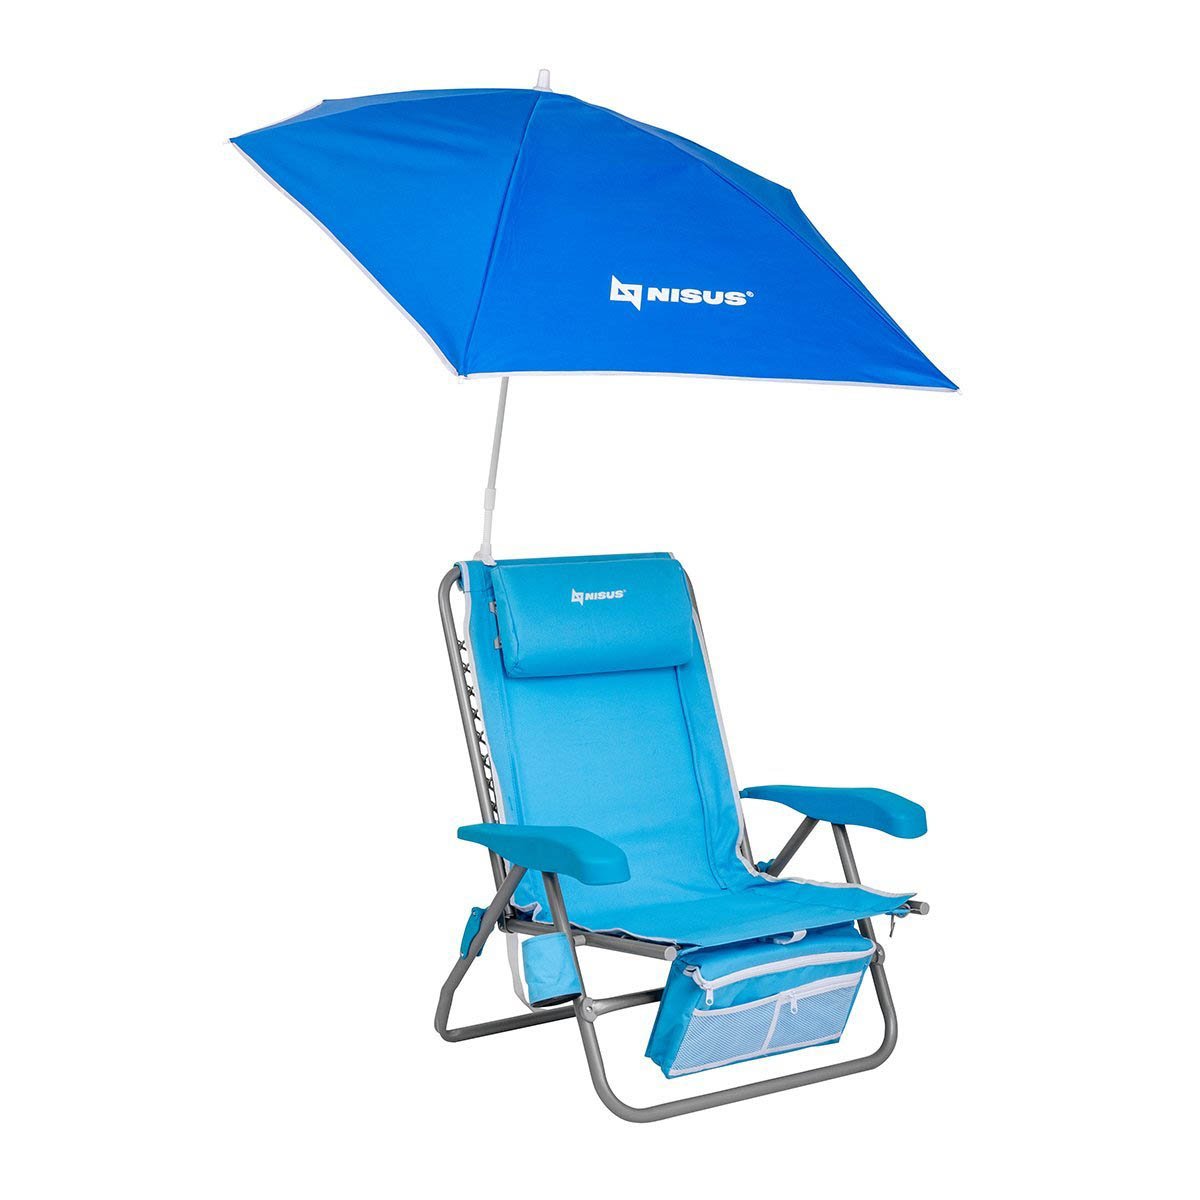 Premium Backpack Beach Chair with Cooler Bag and Headrest, Blue with a blue Strong Clip Adjustable Umbrella